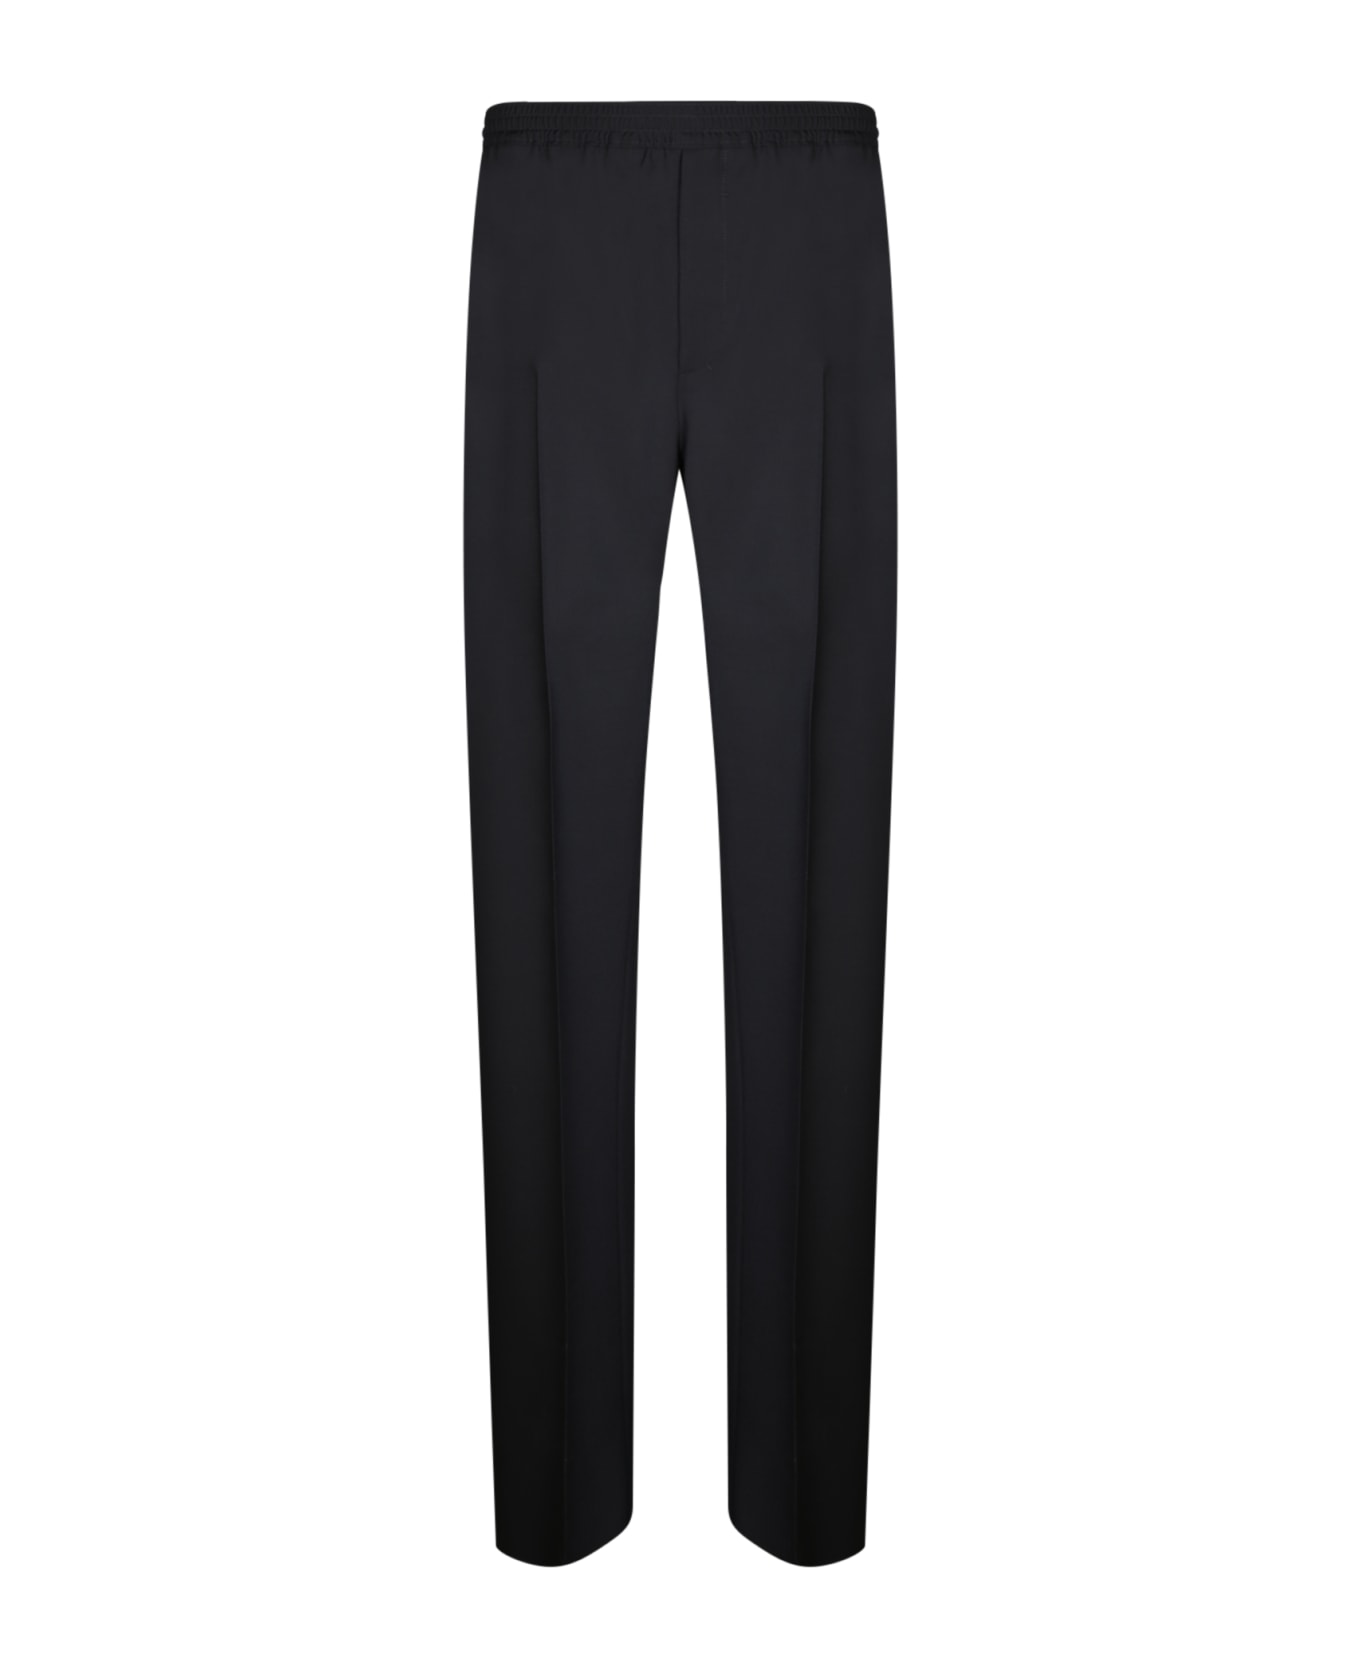 Givenchy Pants In Black Mohair - black ボトムス